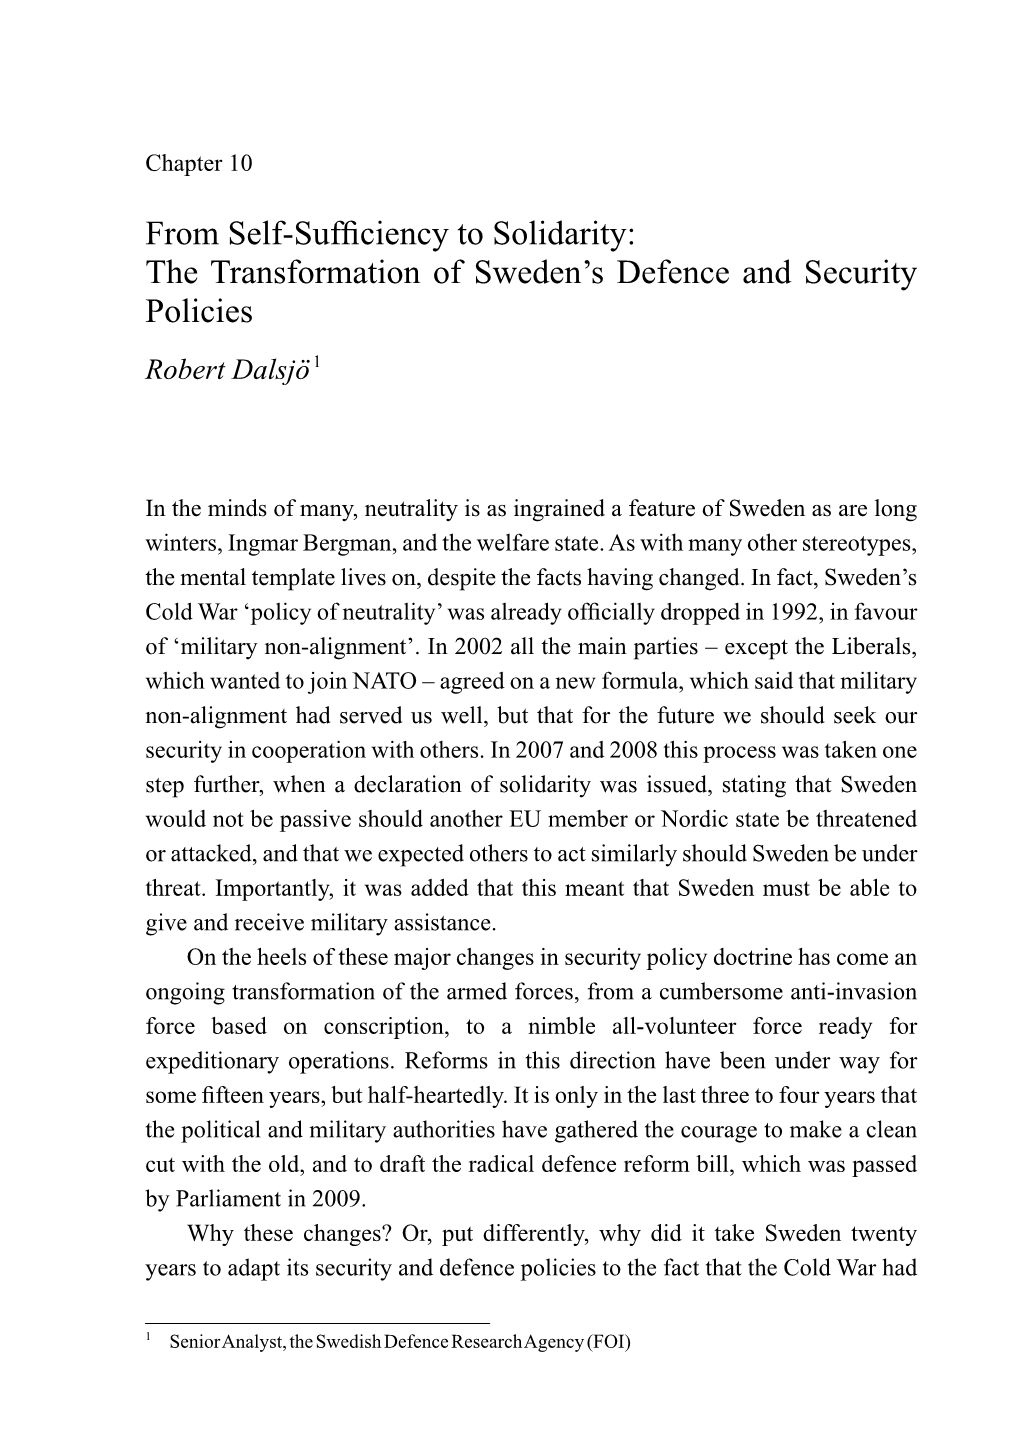 The Transformation of Sweden's Defence and Security Policies